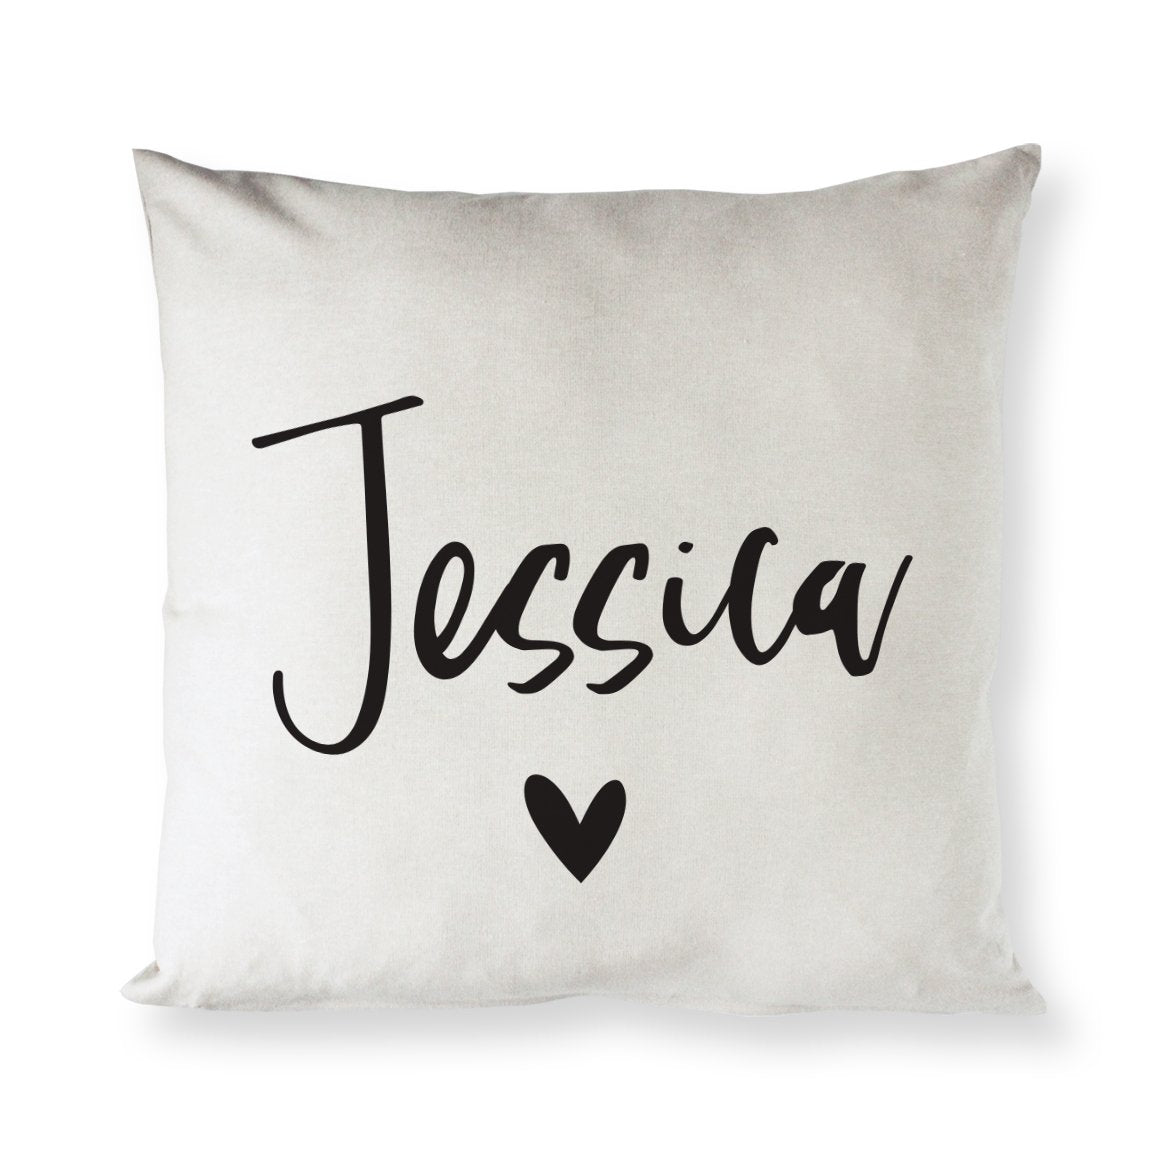 Personalized Pillow Cover 16"x16"